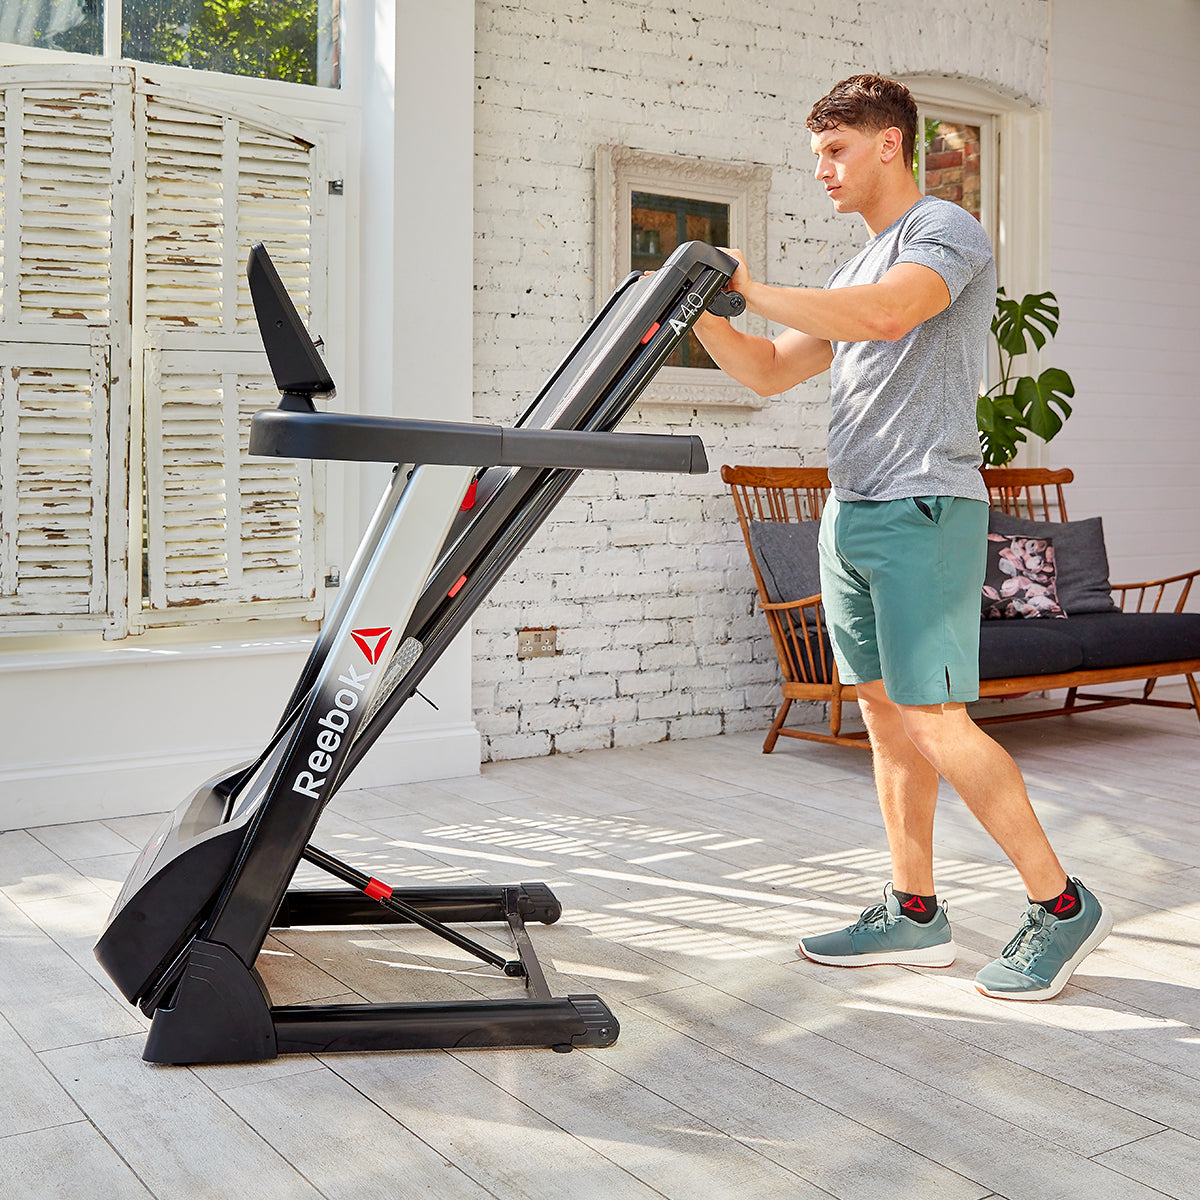 reebok fitness equipment product support